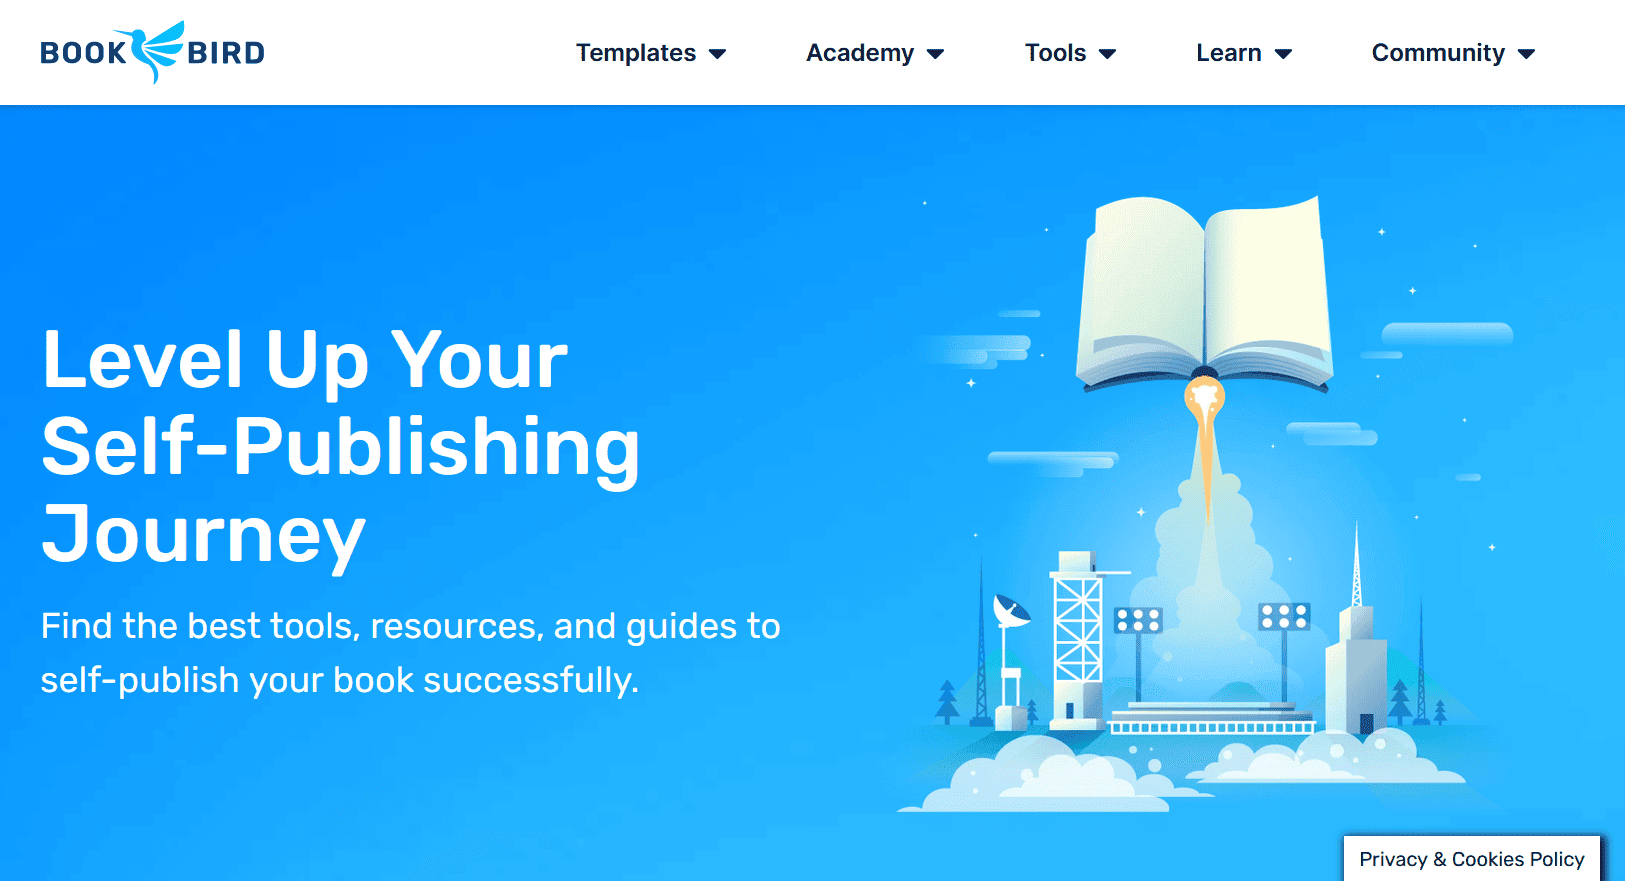 BookBird free alternatives to Book Bolt for low content book publishing